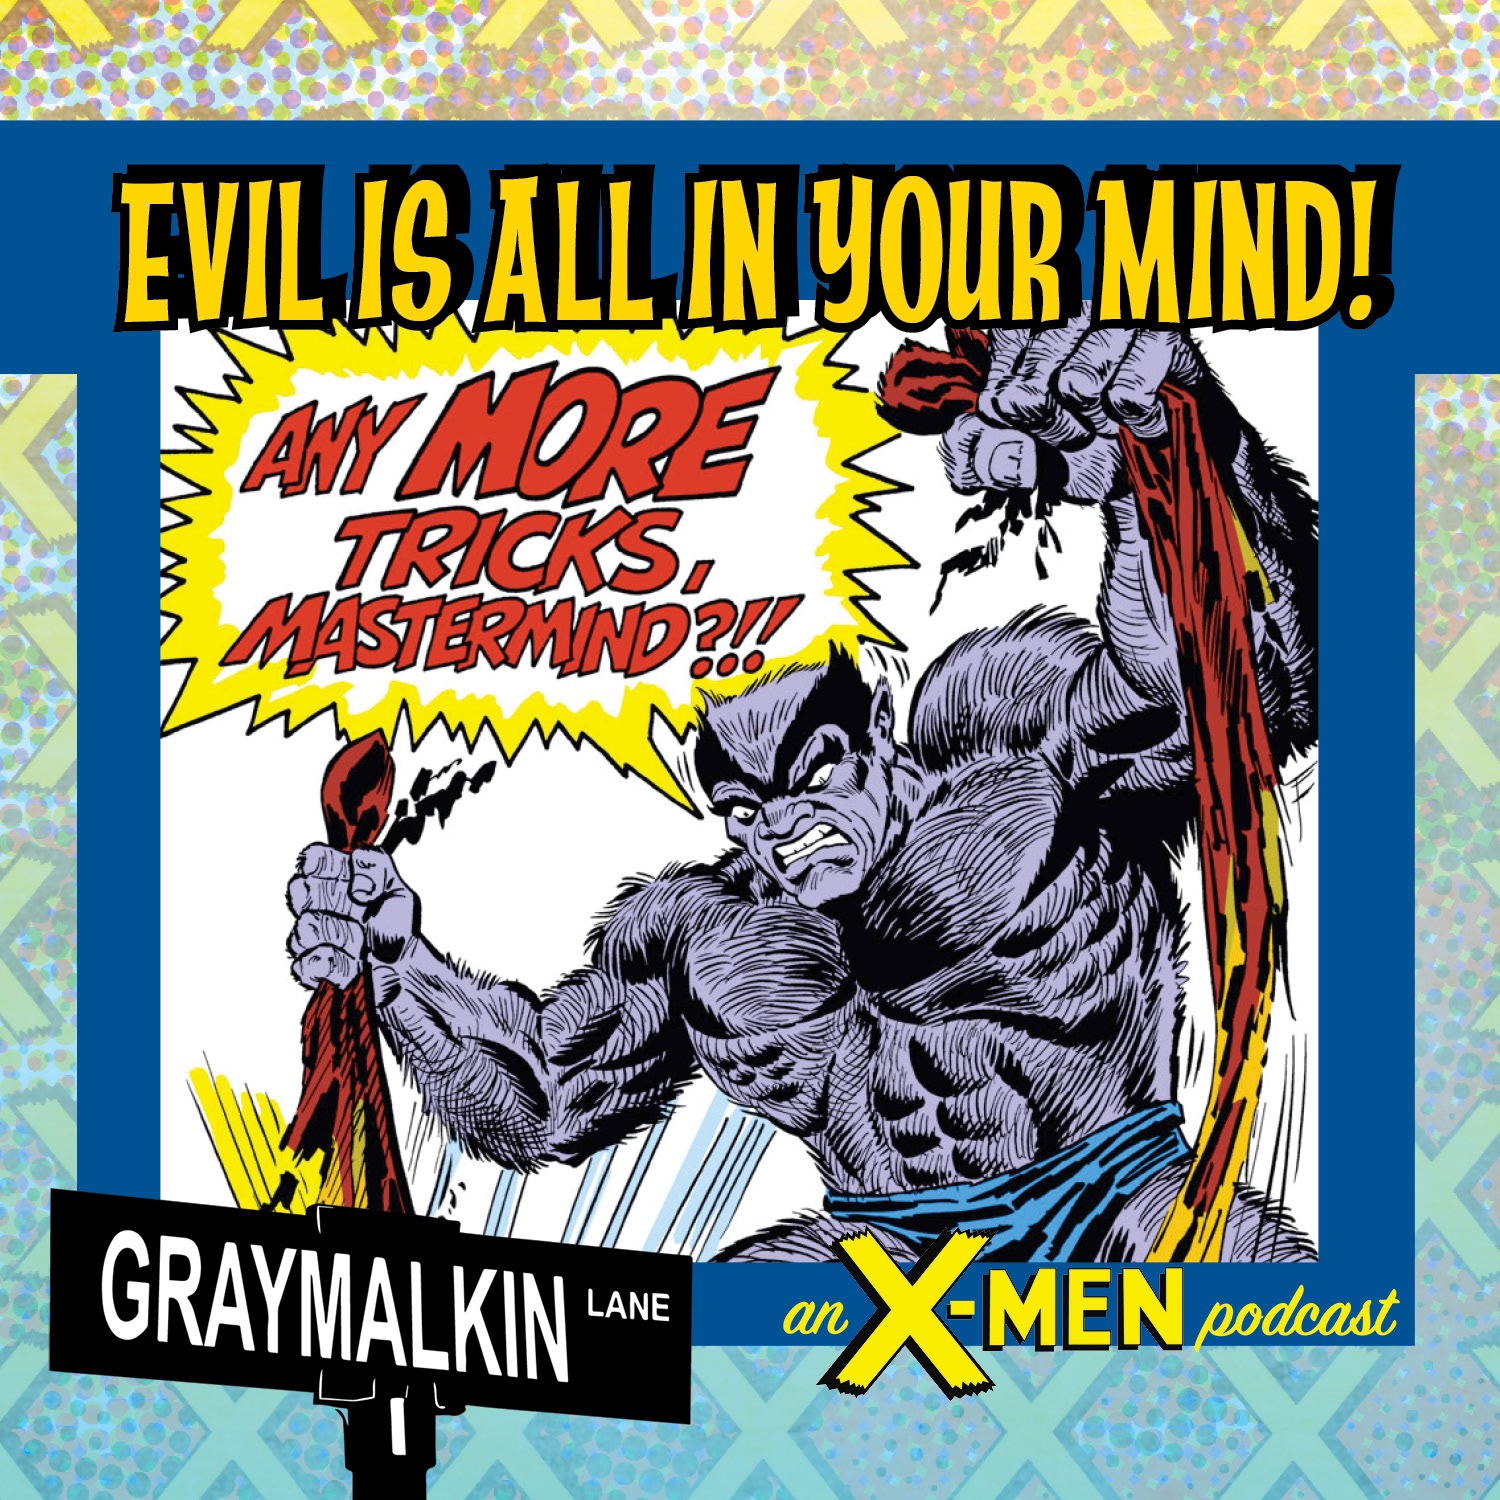 Amazing Adventures 13: Evil Is All In Your Mind! Featuring Jordan Blum! Jordan Olsen! Mike Ciriaco! And an interview with Fabian Nicieza, including Philip Sevy!